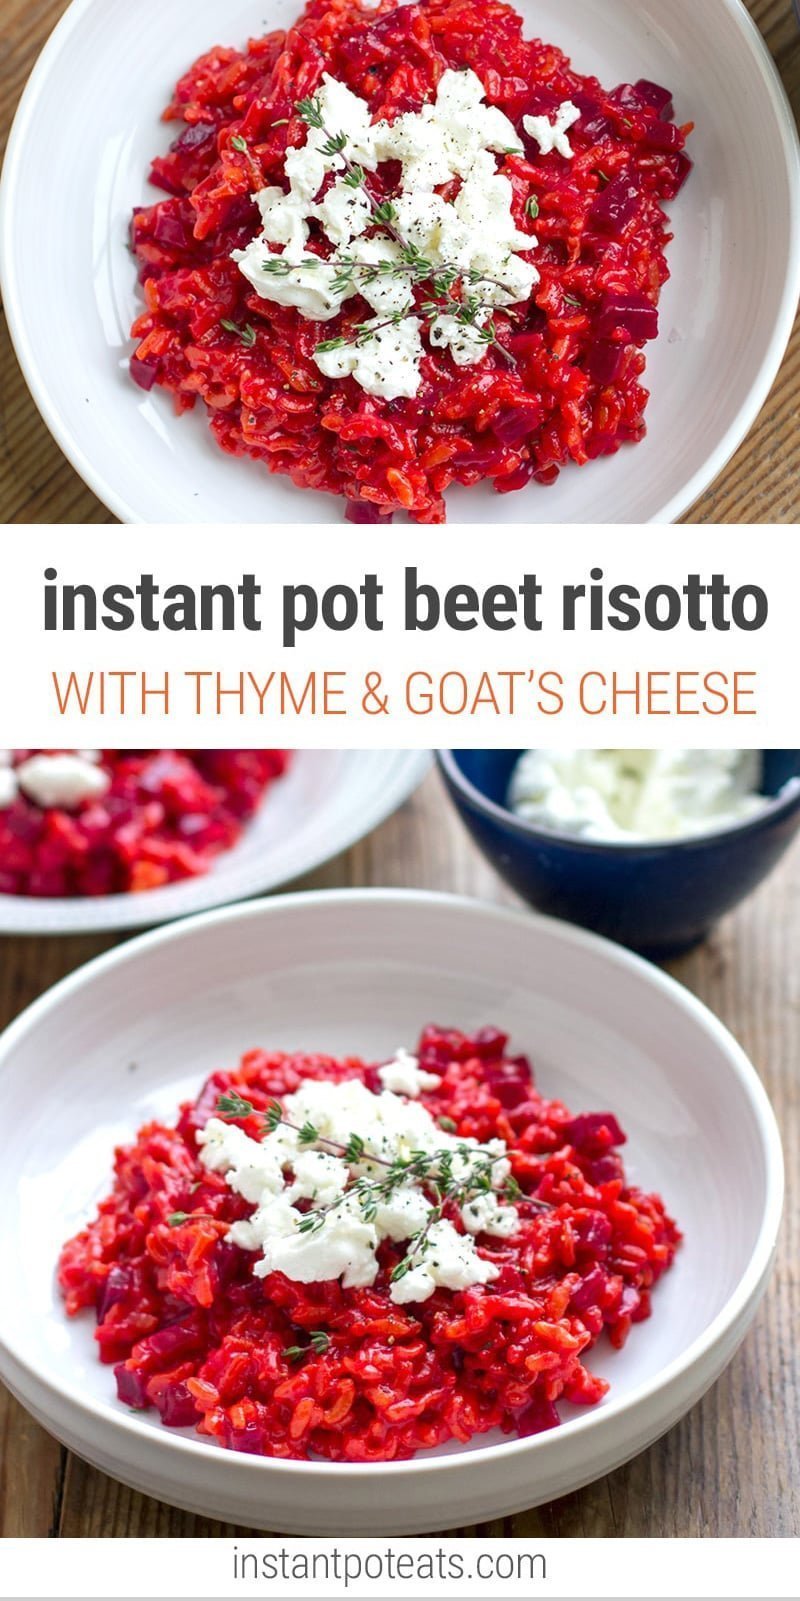 Instant Pot Beet Risotto With Thyme & Goat's Cheese (Vegetarian, Gluten-free)